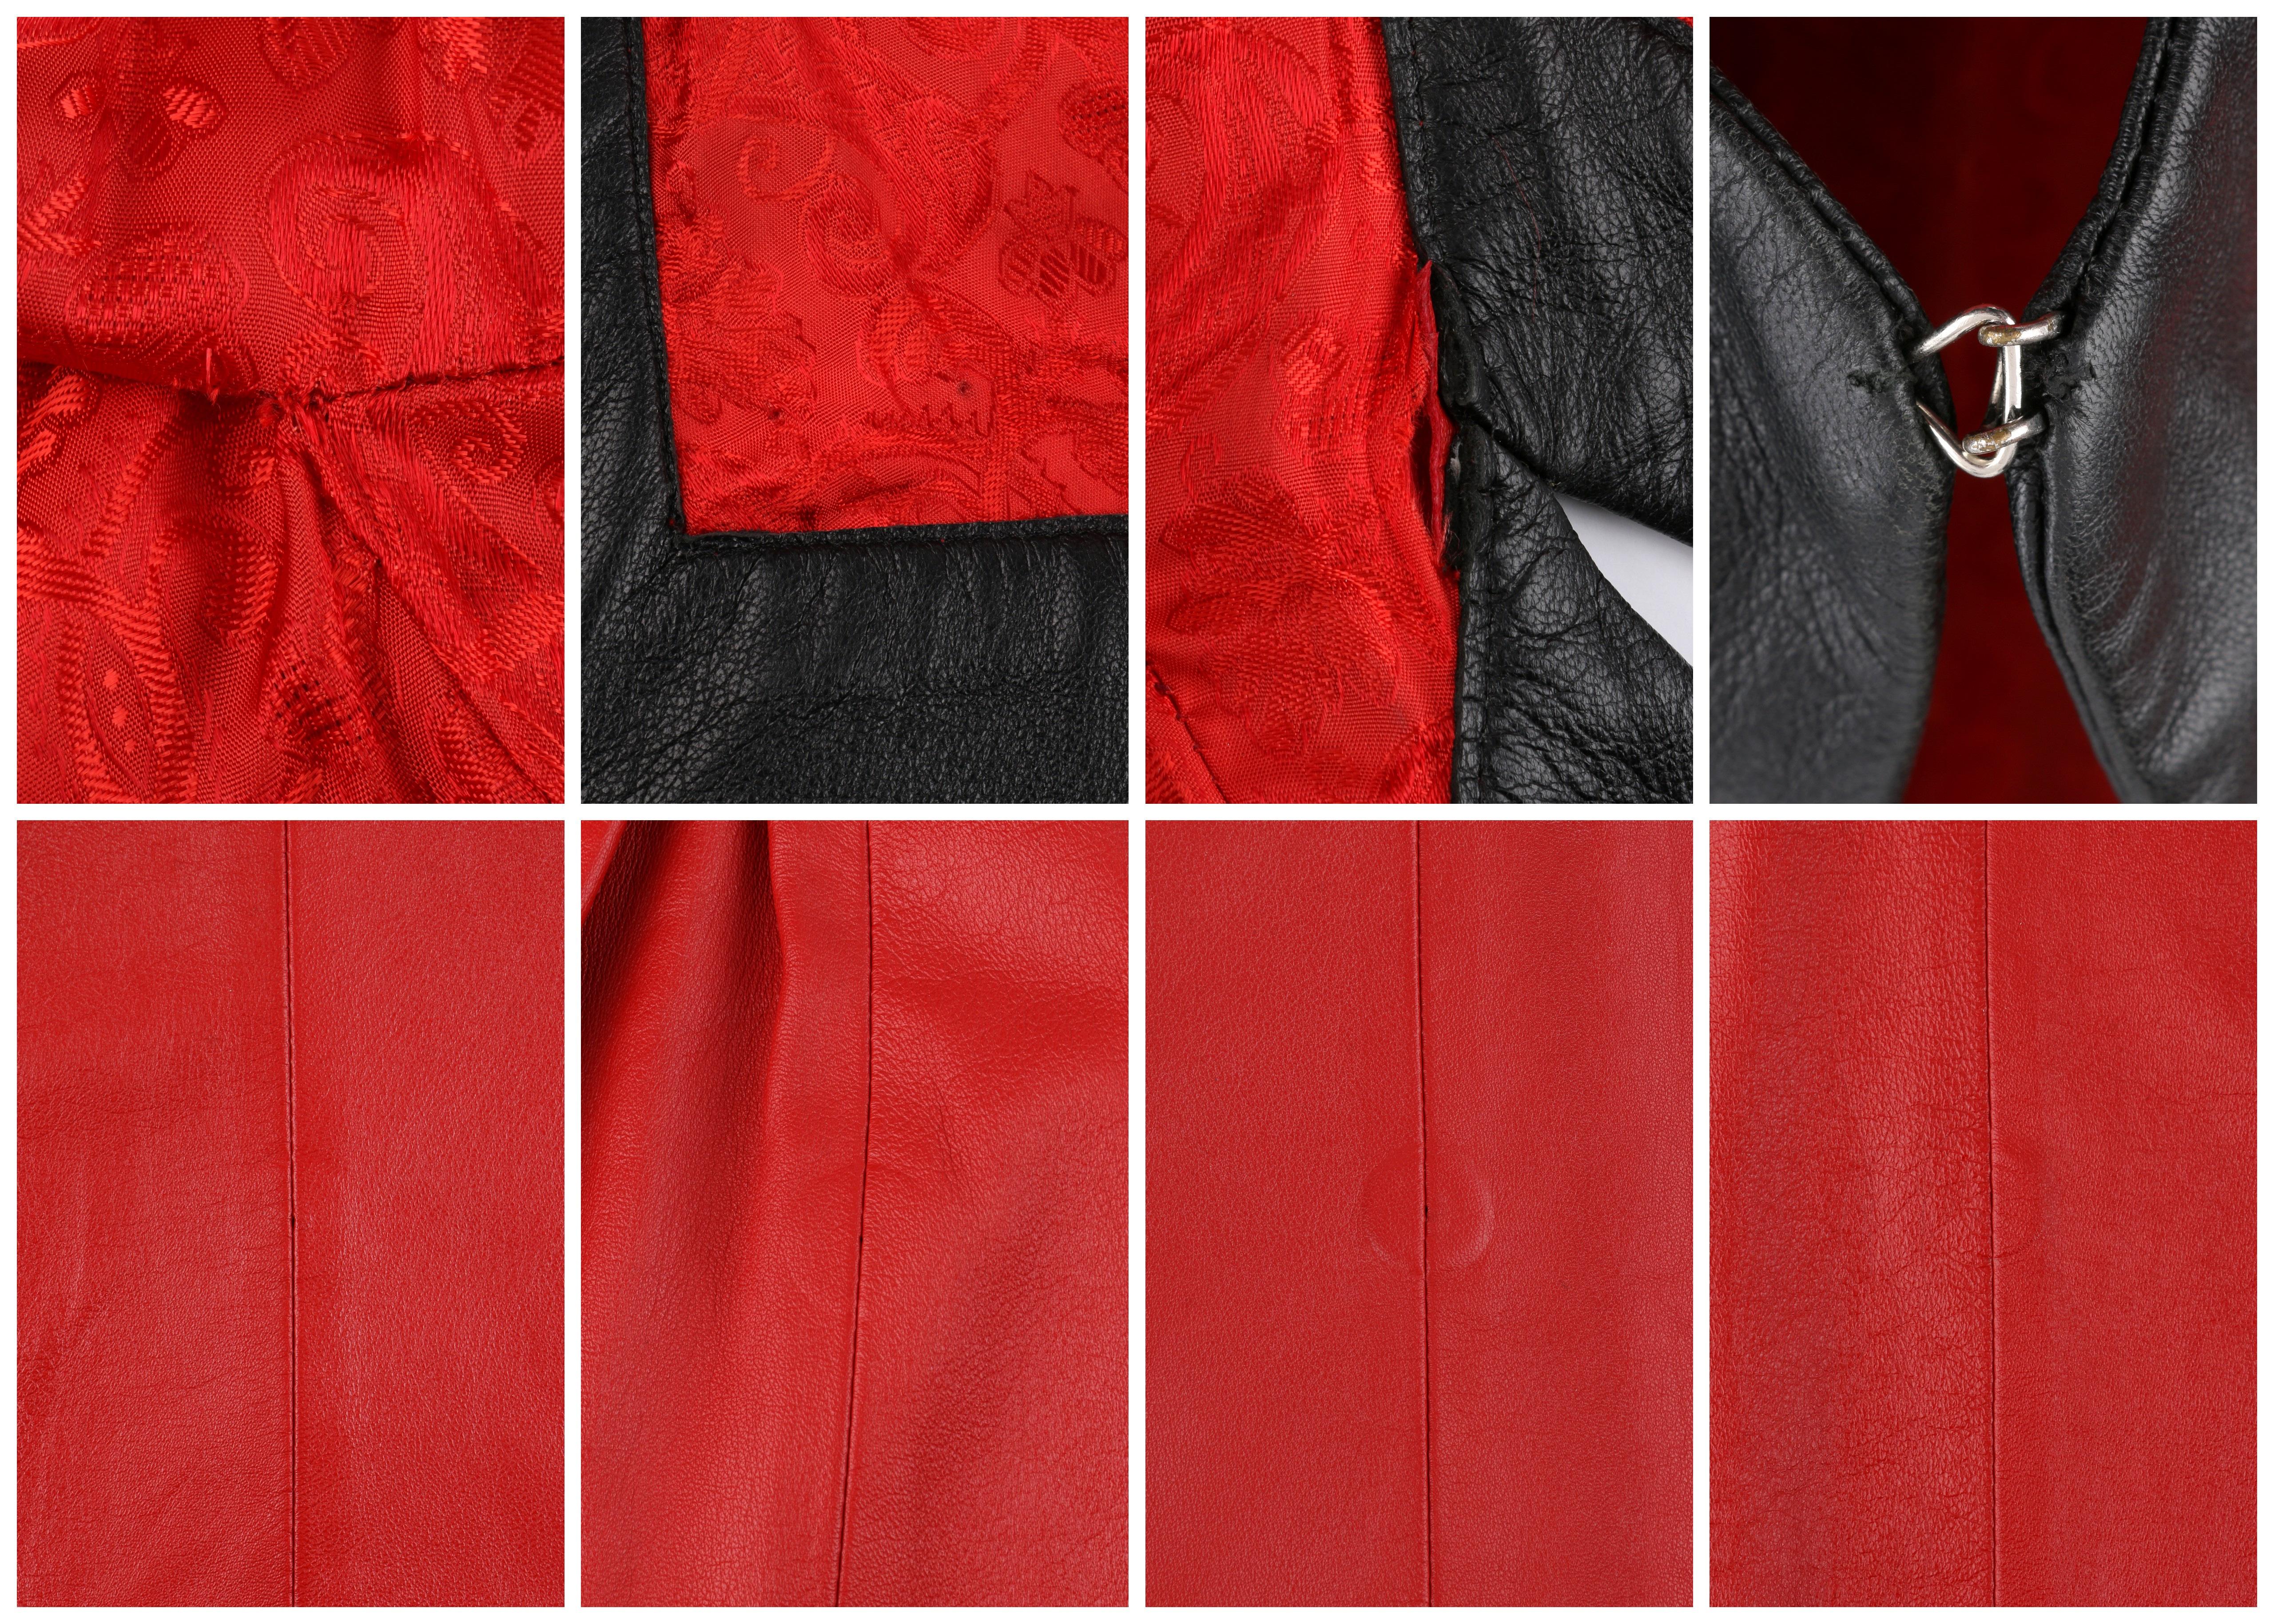 ALEXANDER McQUEEN S/S 2000 “Eye” Runway Red Black Leather Cut Out Vest Jacket For Sale 1